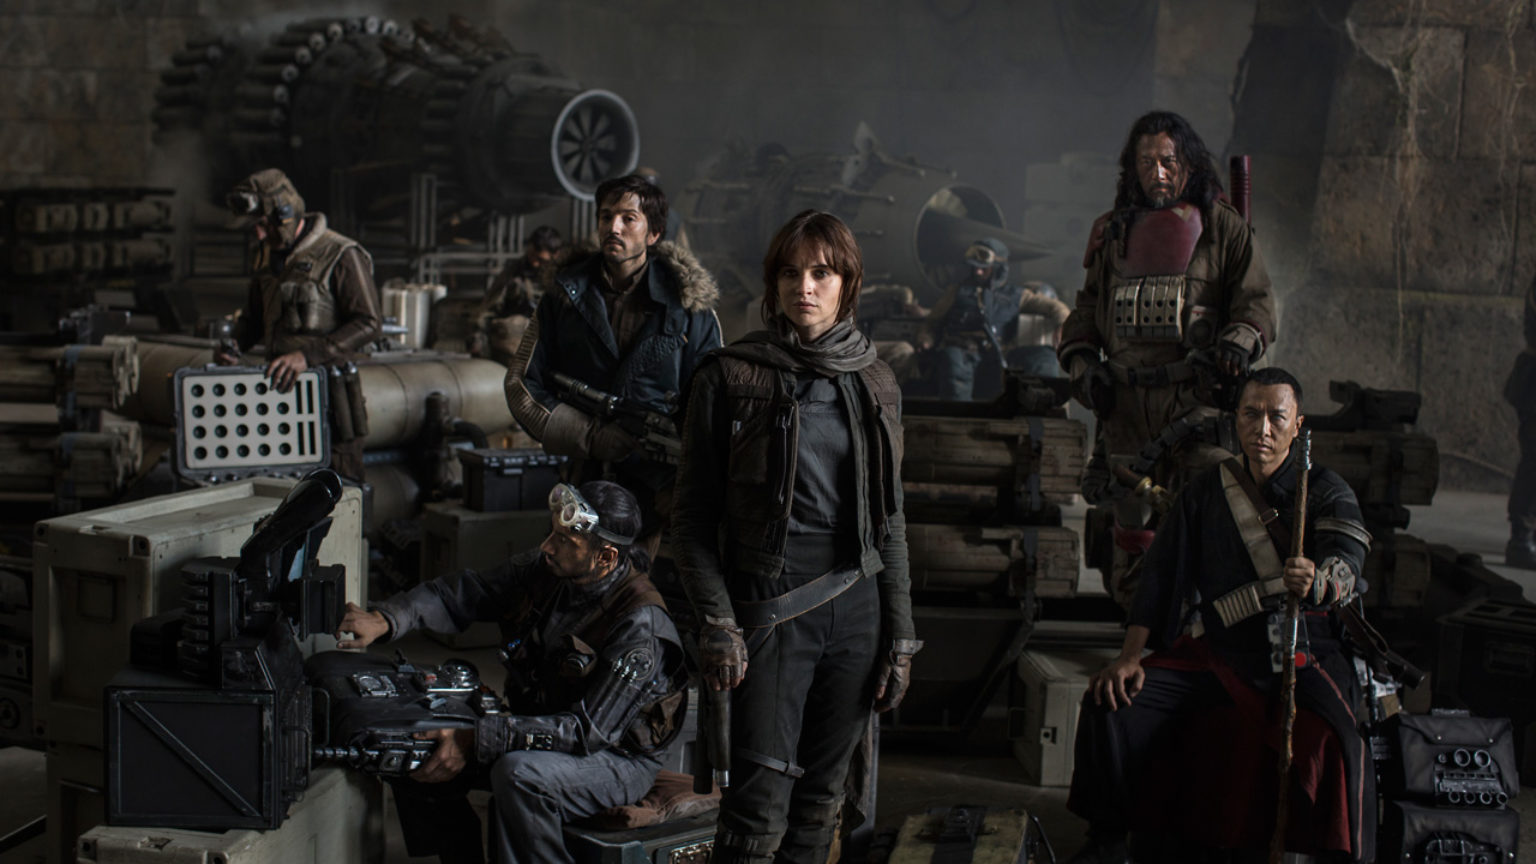 Rogue One was Lucasfilm's first standalone film. Though very popular, the movie still draws a mixed bag of reviews between fans.